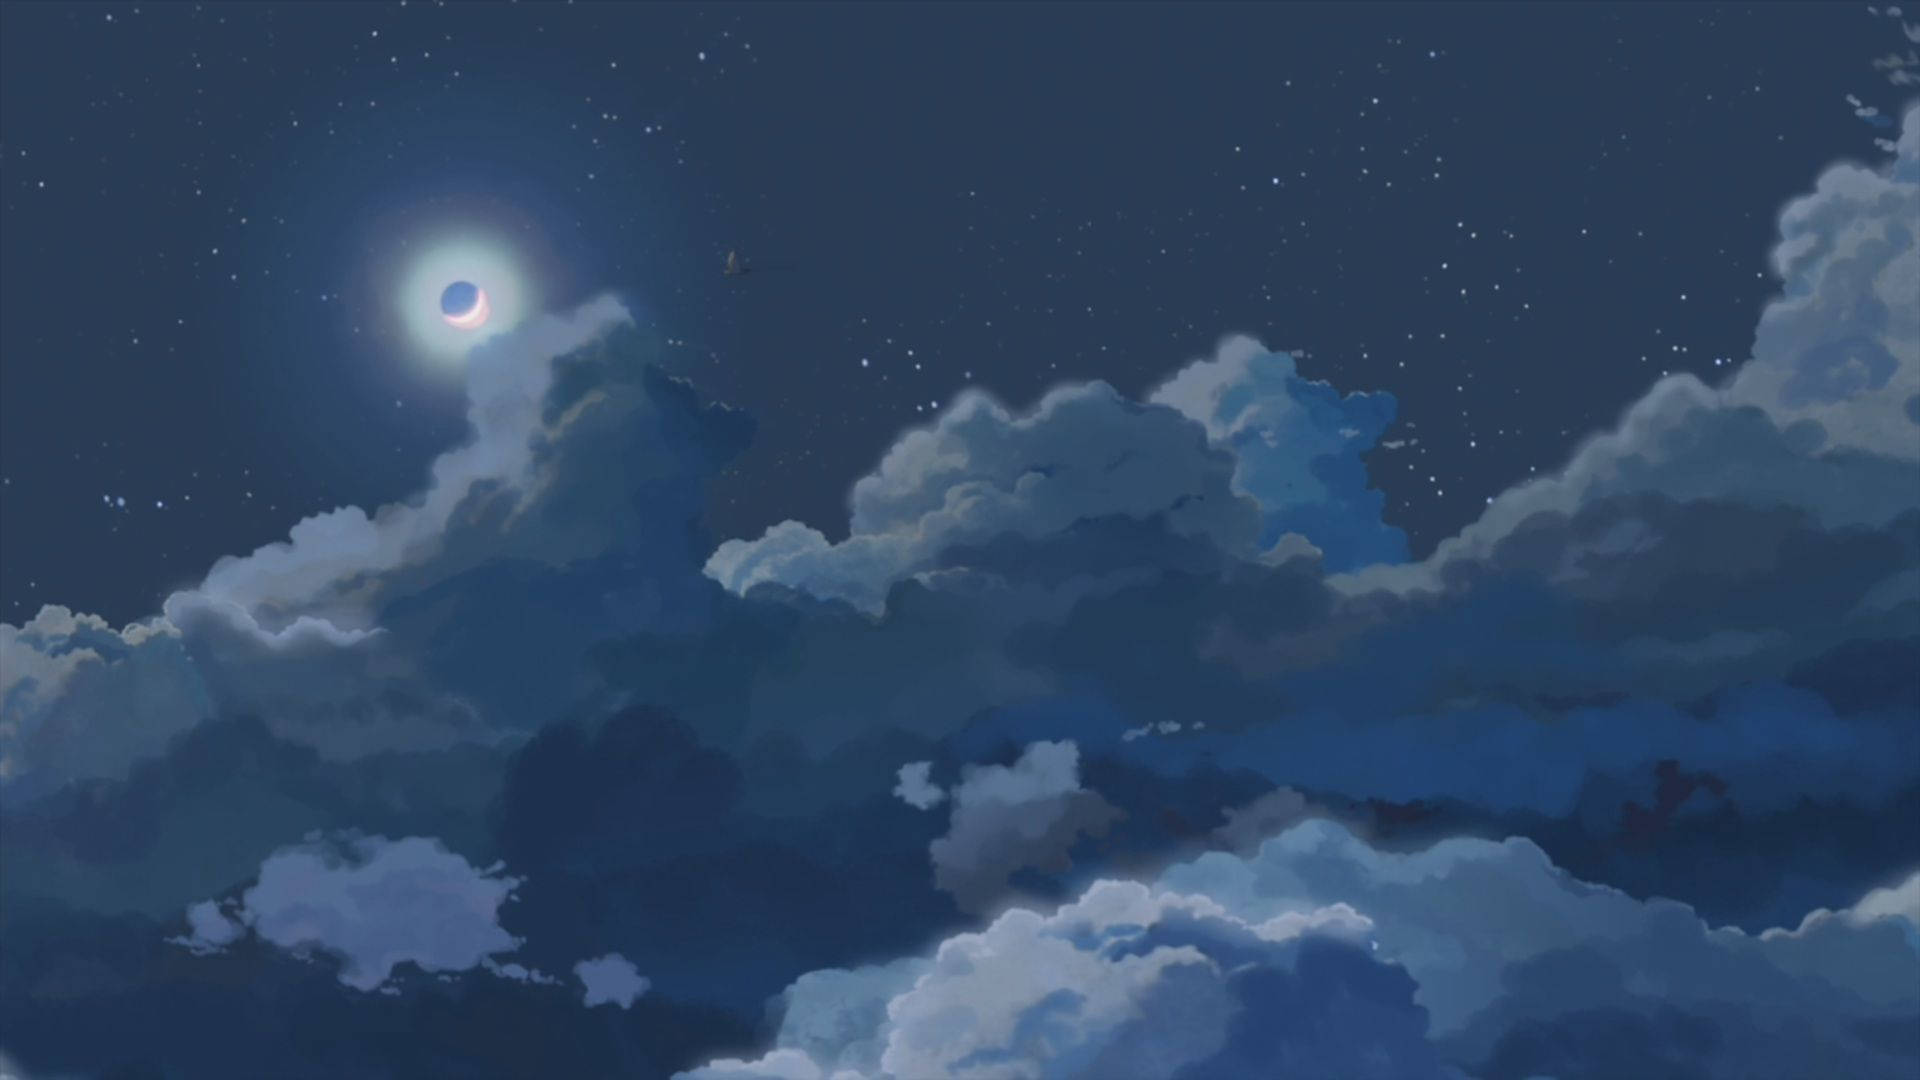 A tranquil and calming blue anime landscape Wallpaper